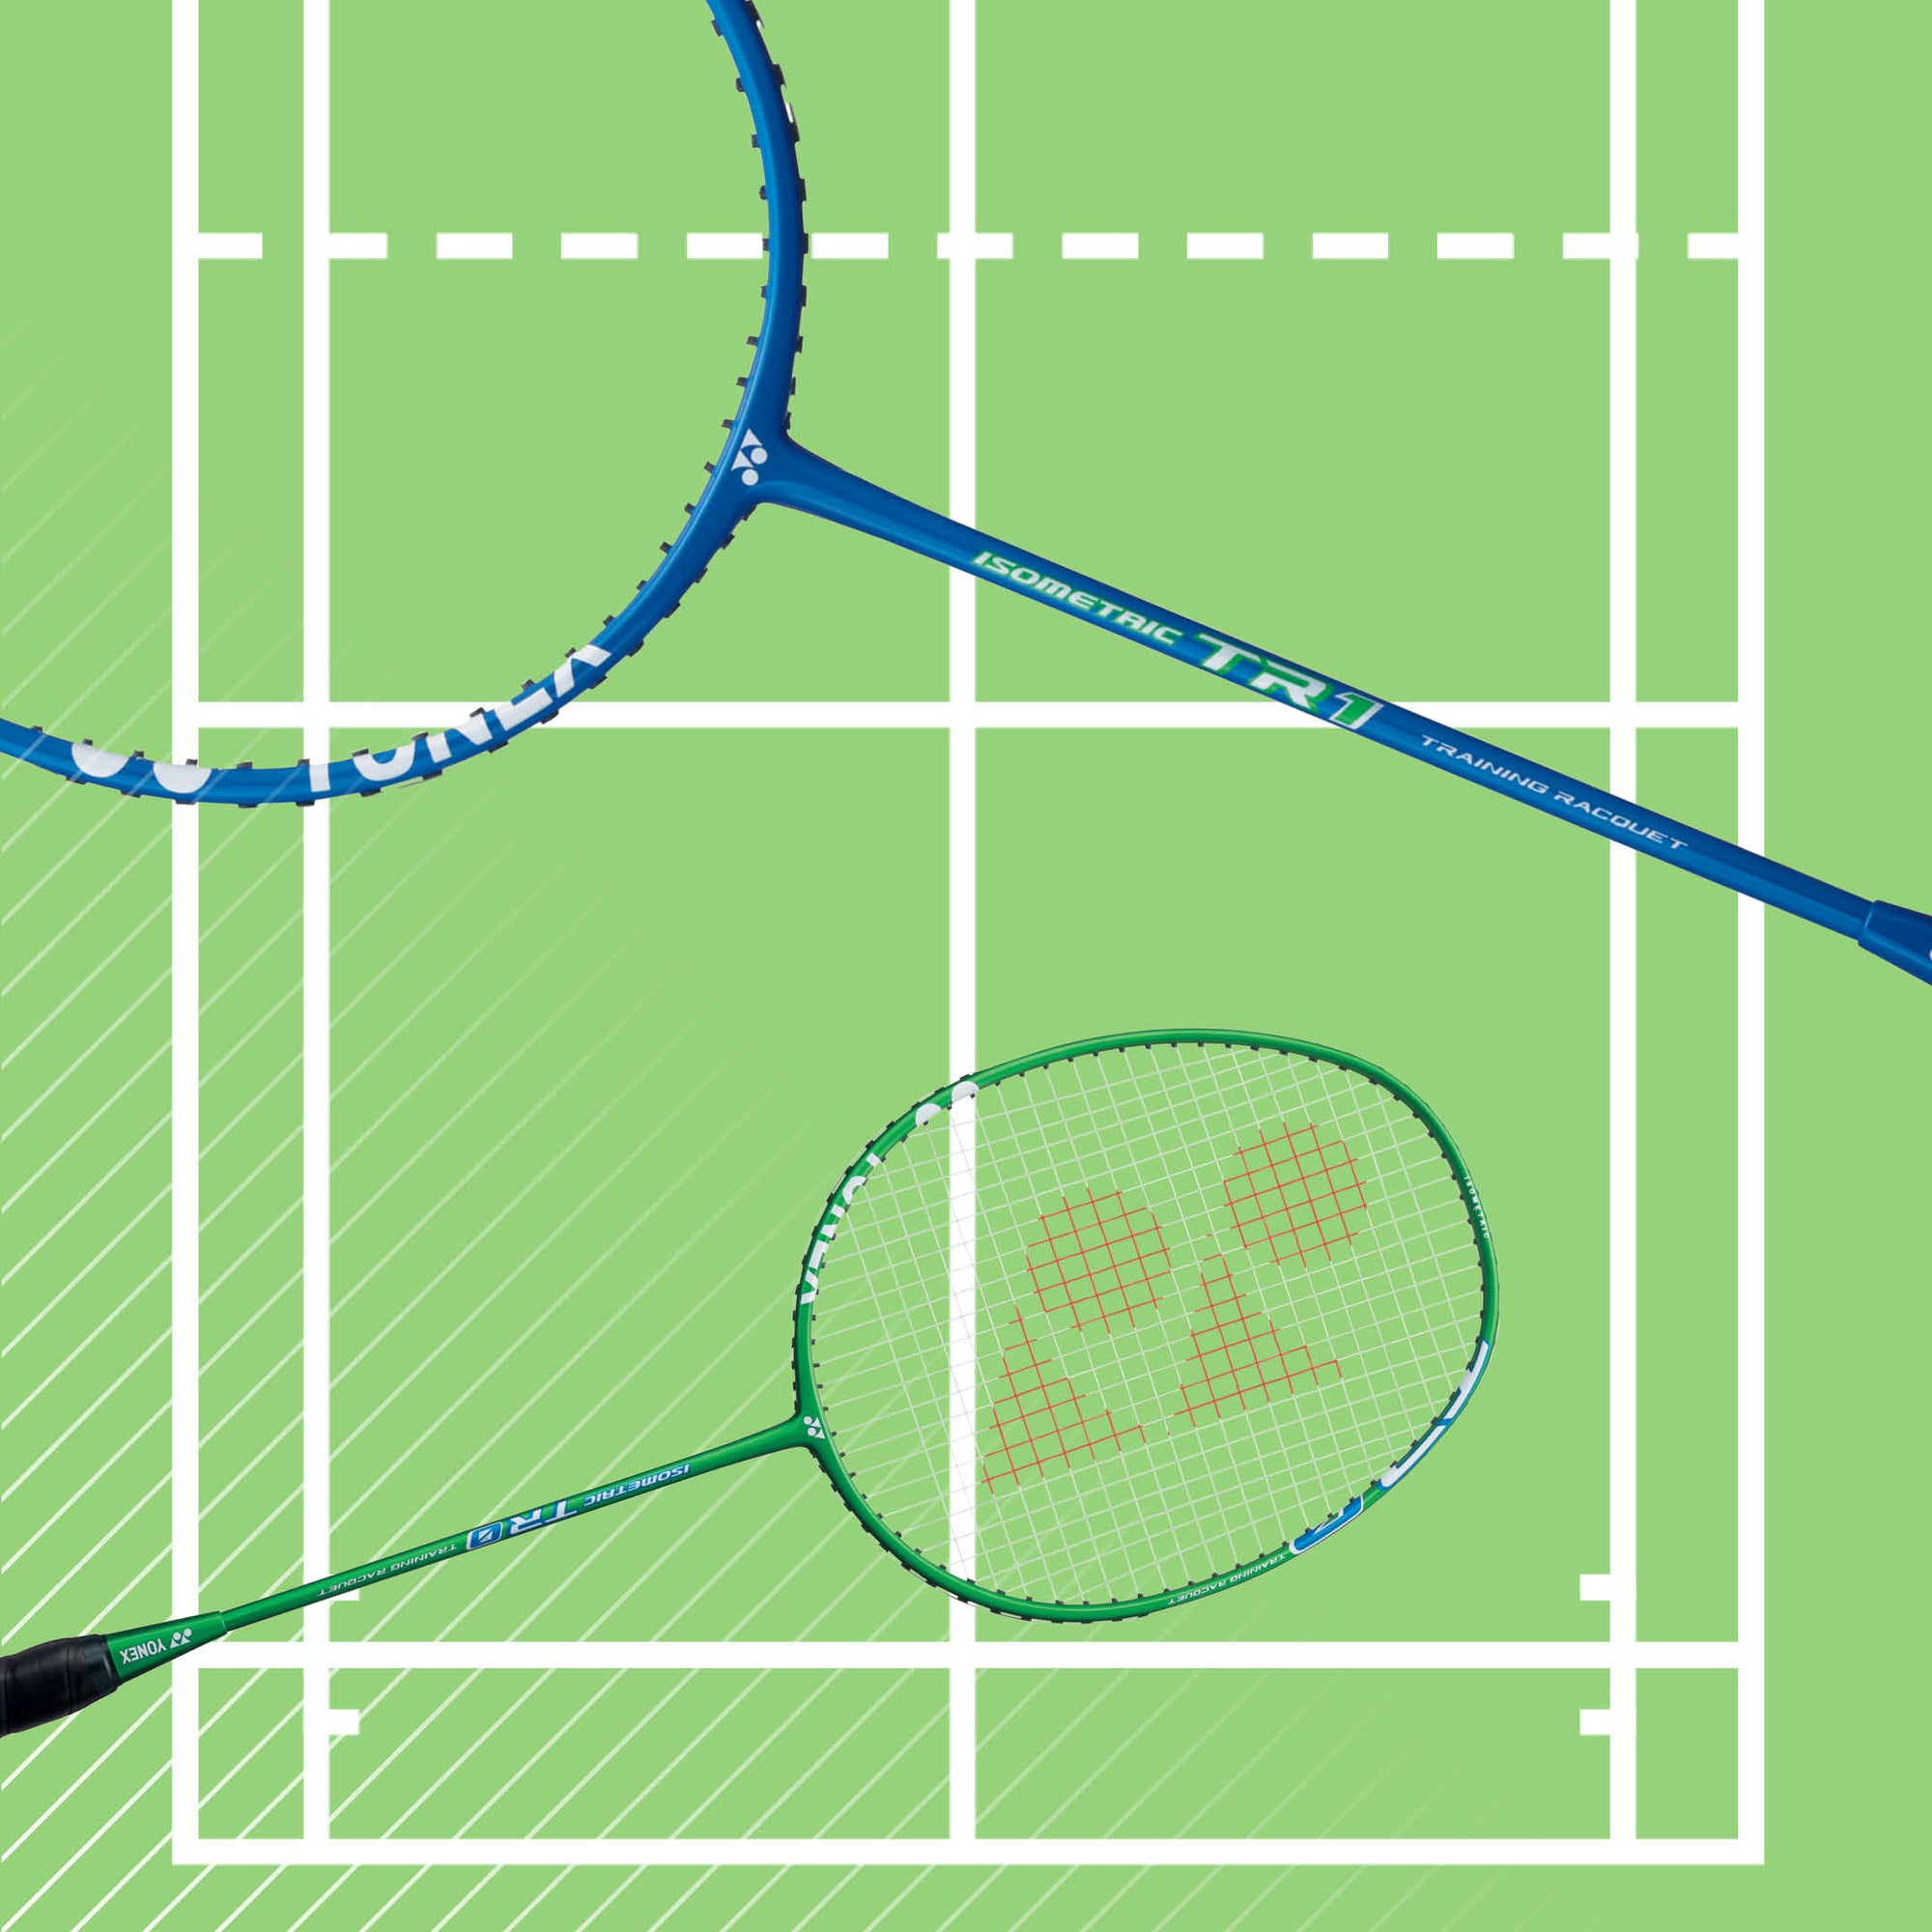 Why are training rackets useful?